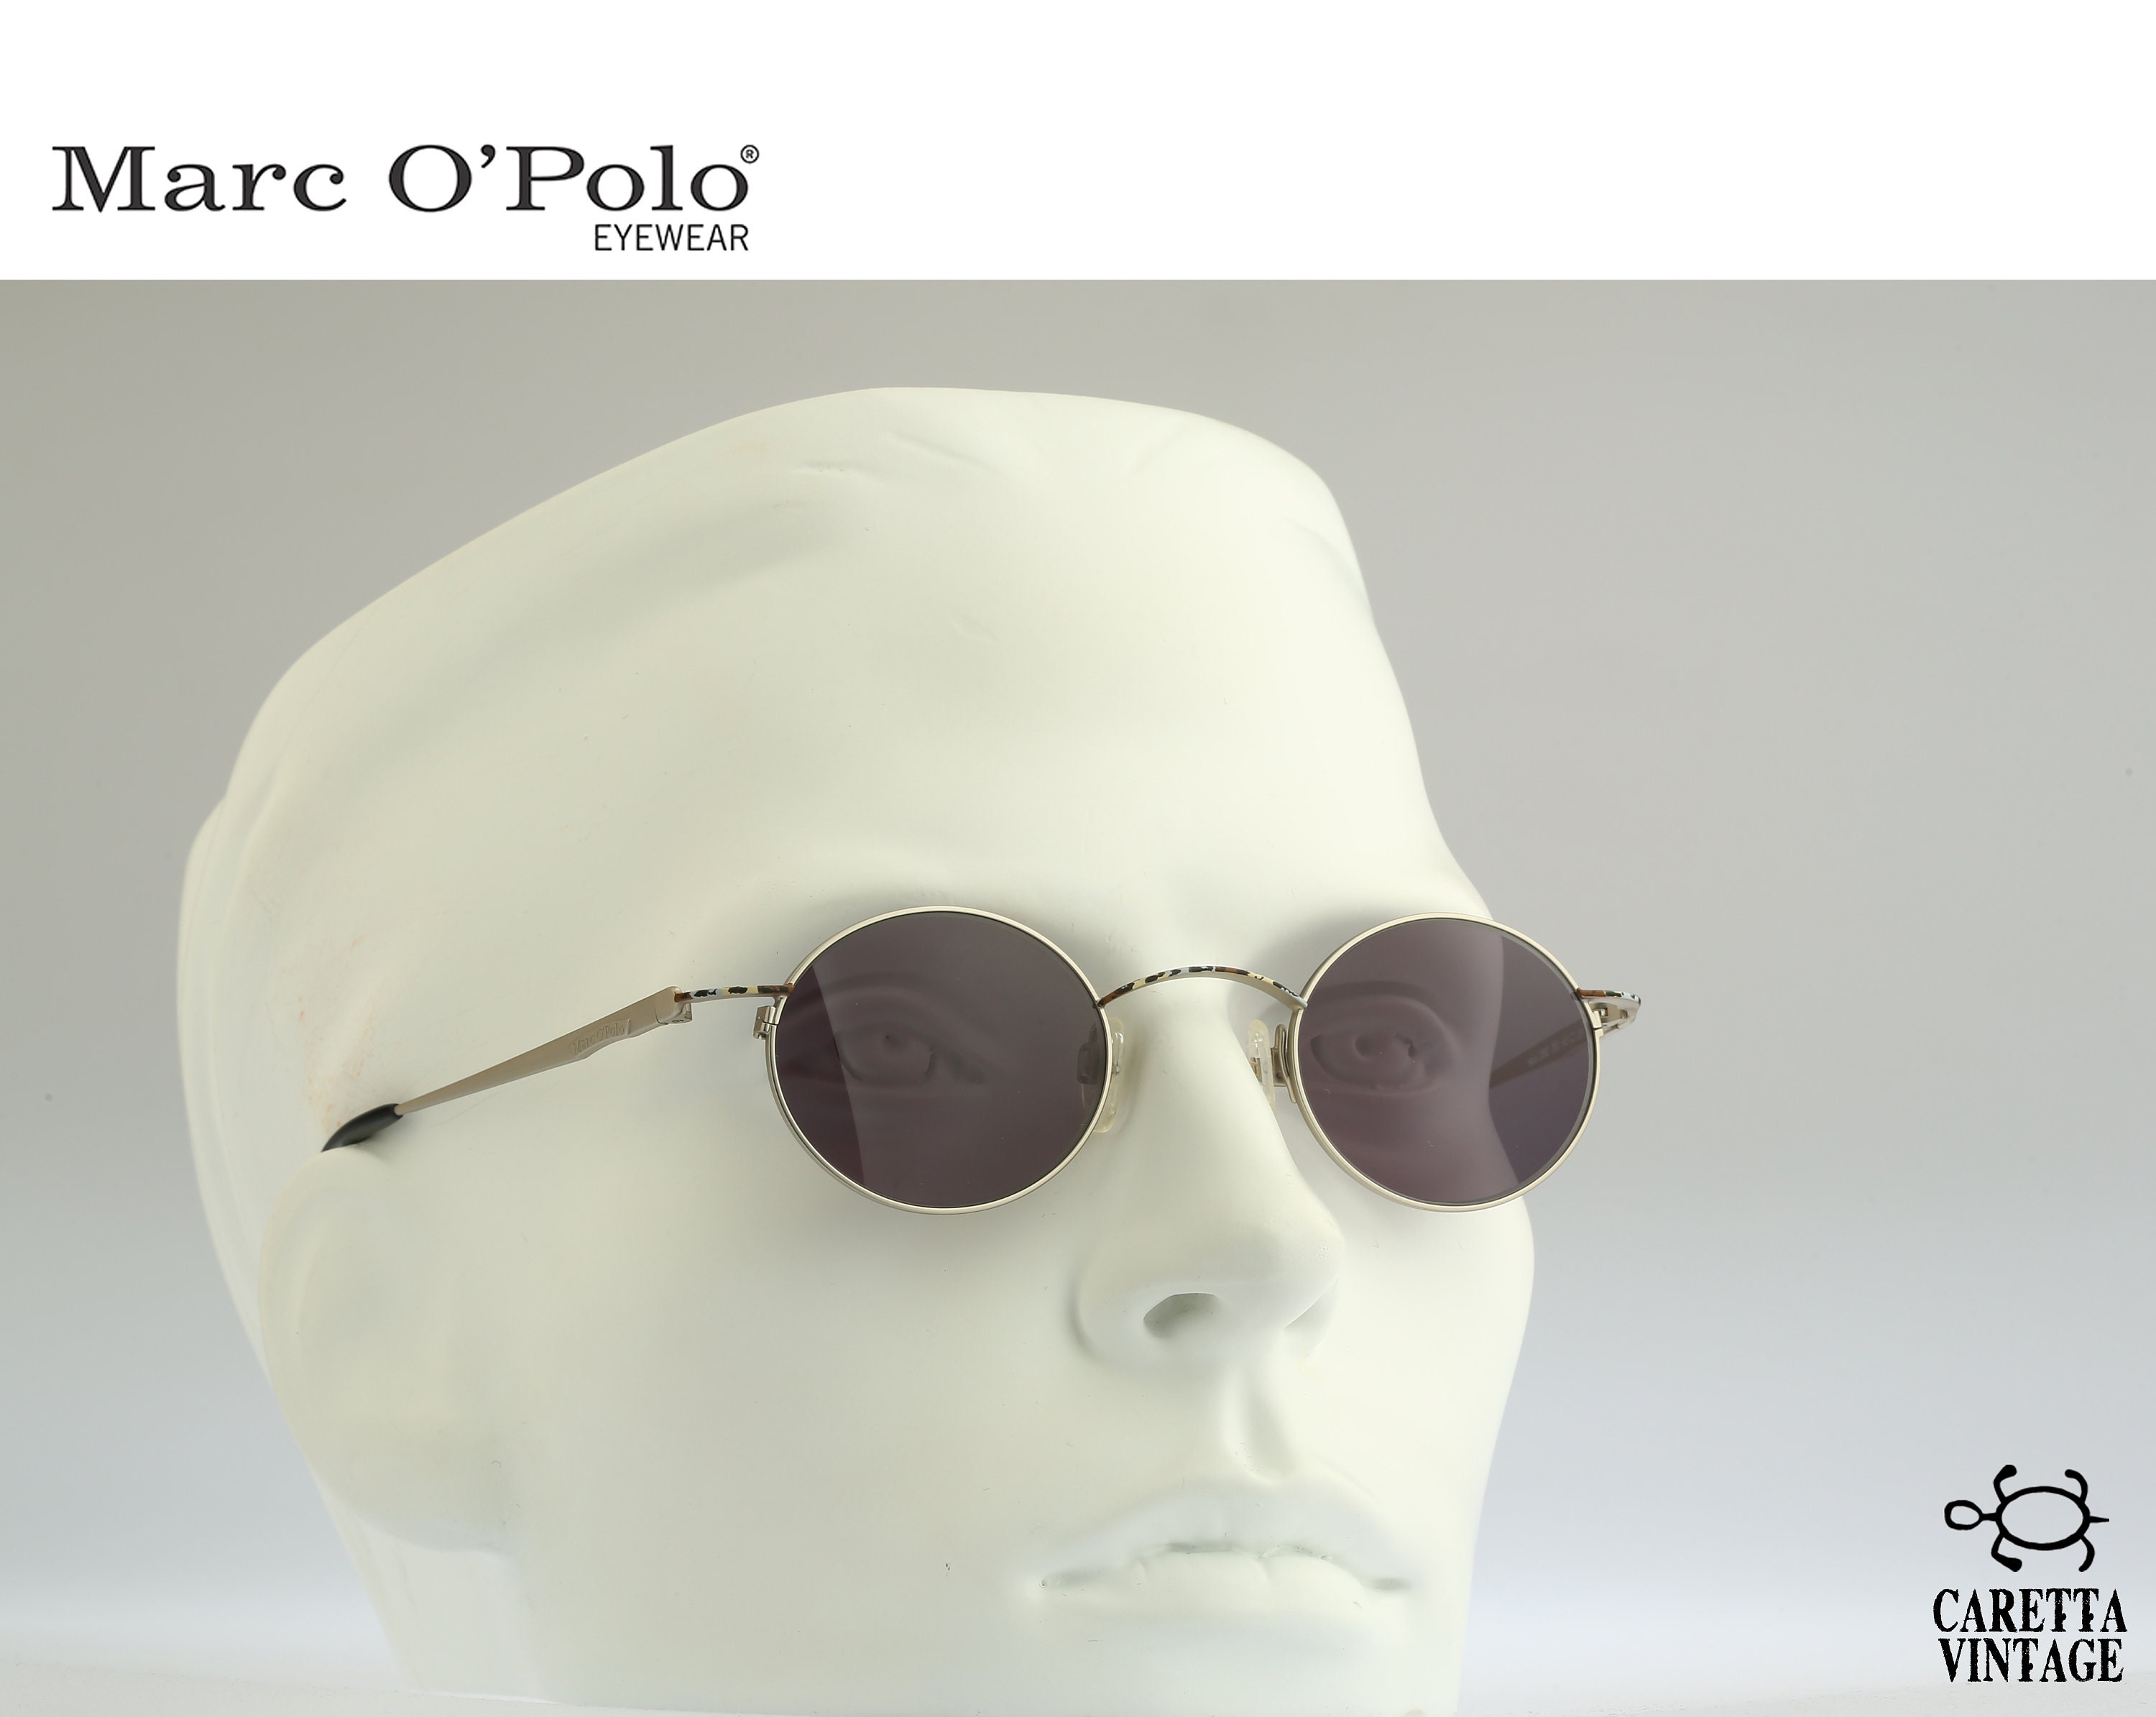 Small Circle Sunglasses Men, Marc O'polo by Metzler 3382 350, Vintage 90s  Silver Round Steampunk Sunglasses Women NOS 